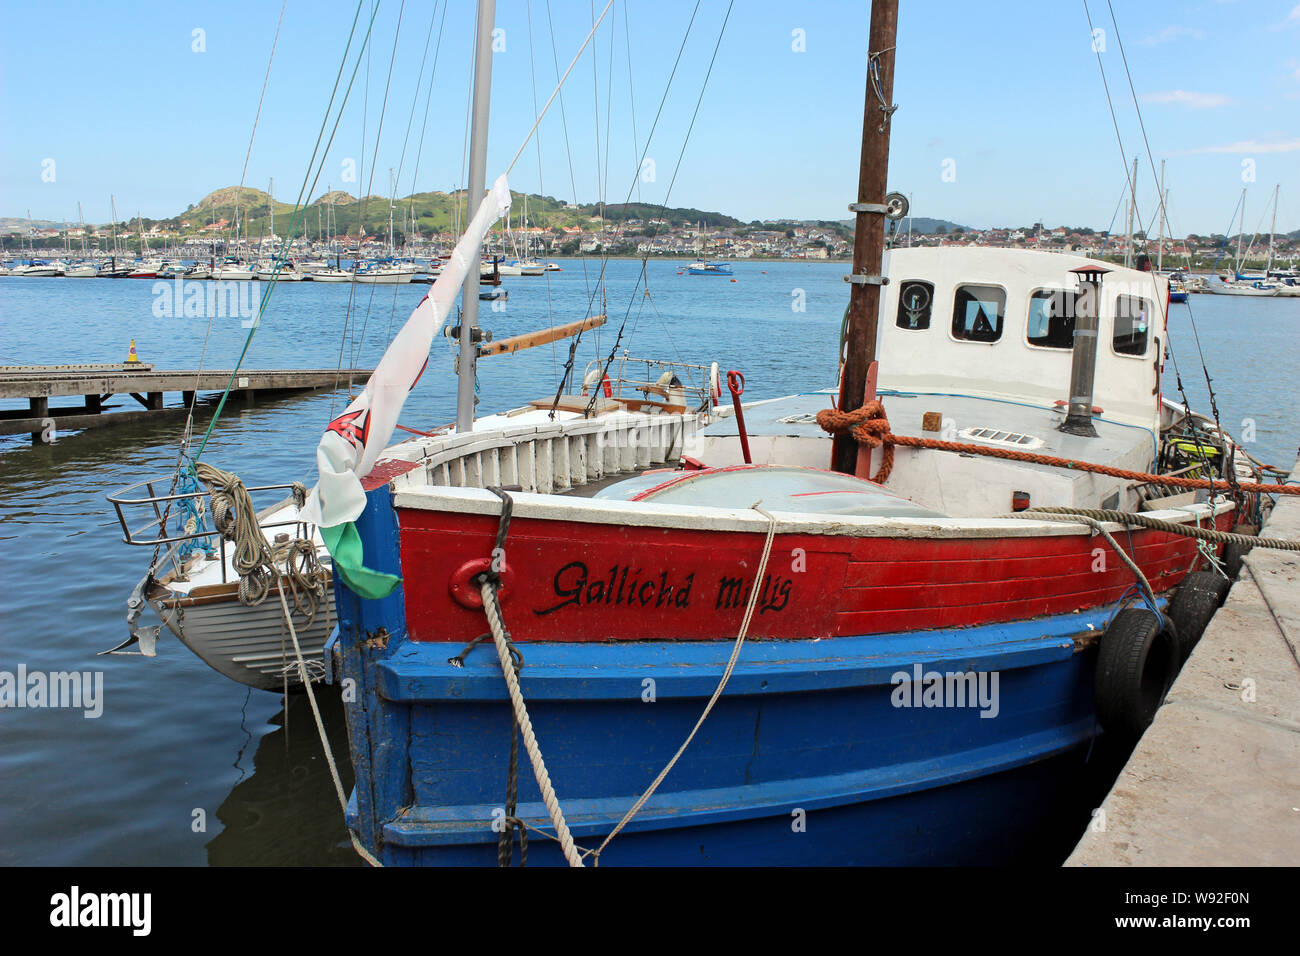 Wooden Fishing Boat 'Gallichd Millig' at Conwy Quay, Conwy, Wales Stock Photo